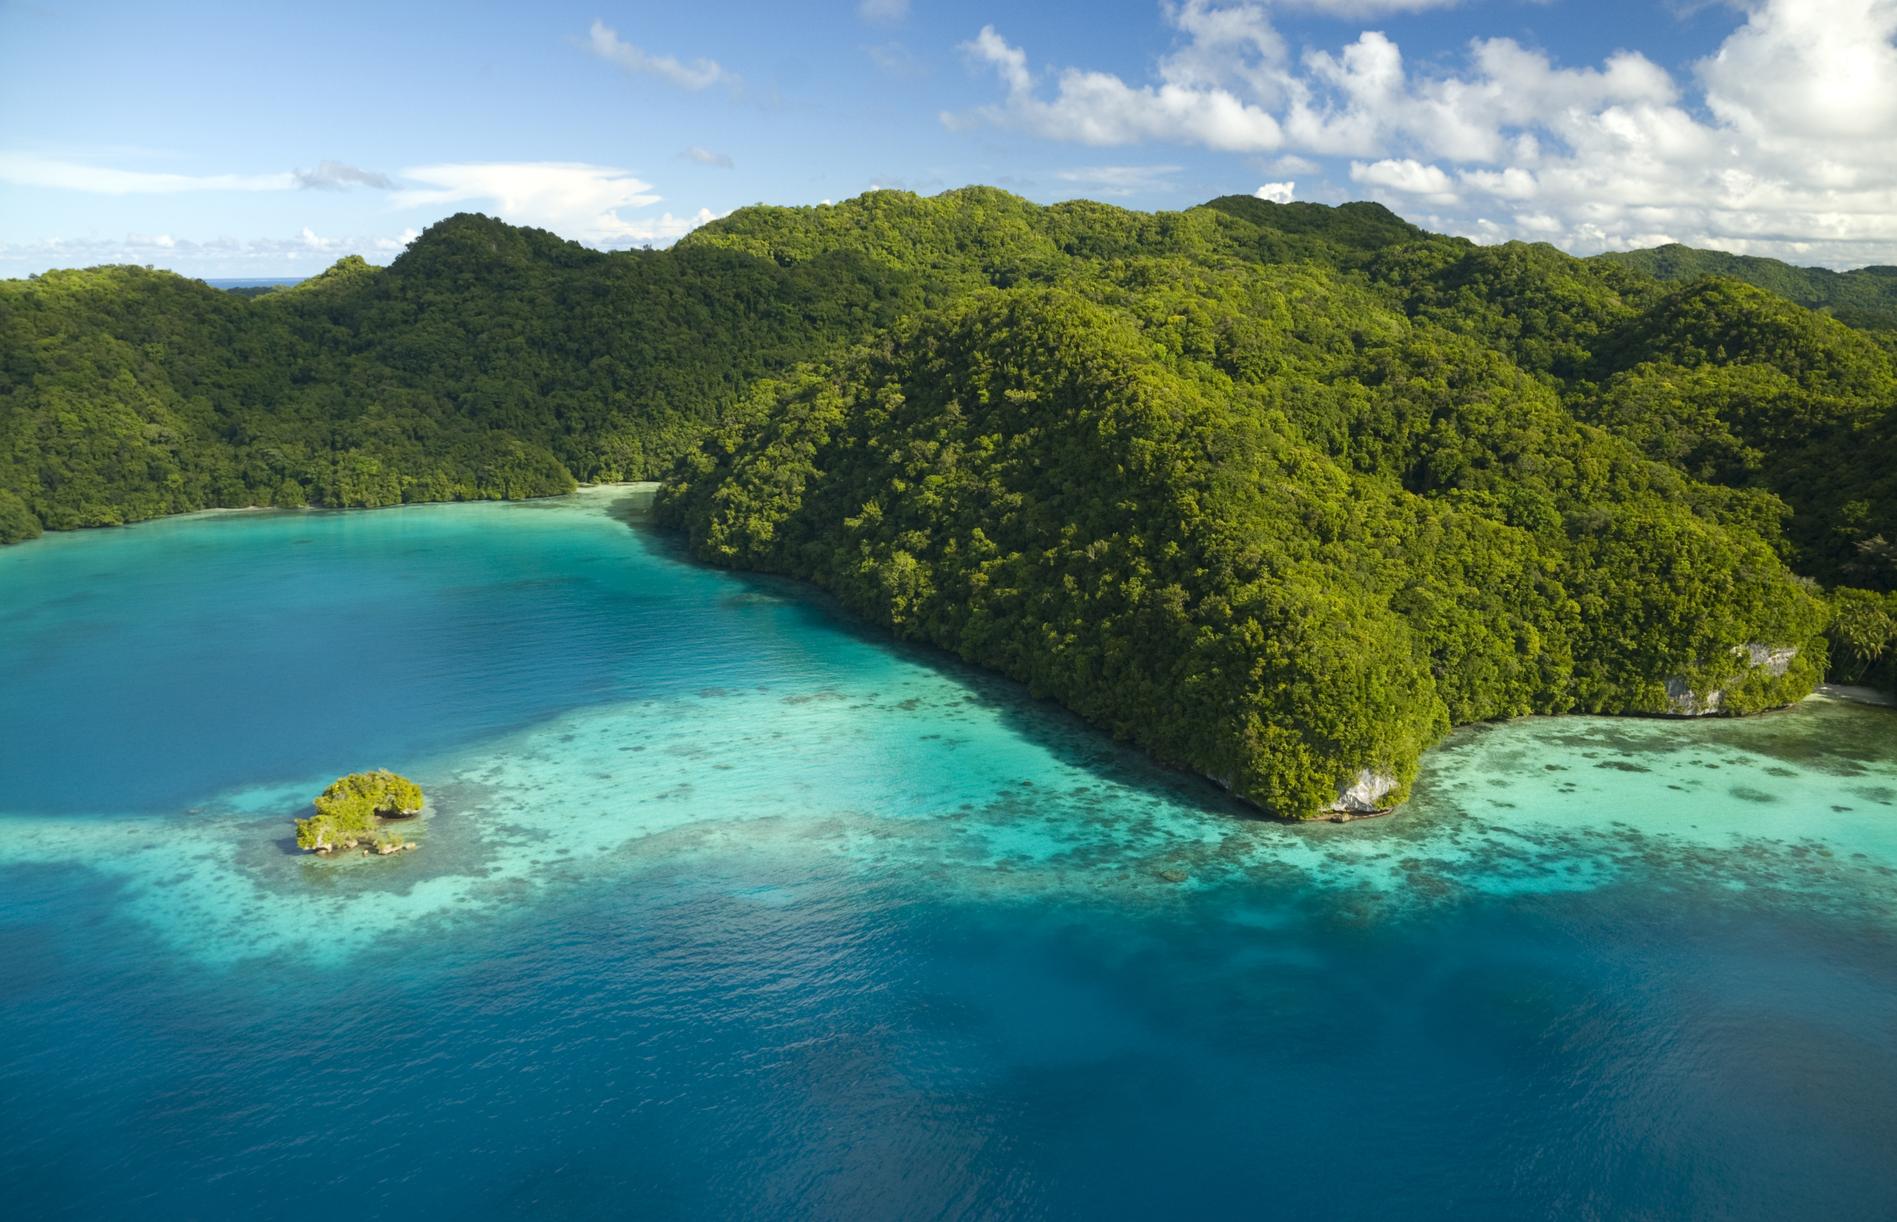 The Rock Islands of Palau, also called Chelbacheb, are a collection of several hundred small limestone or coral uprises in the Southern Lagoon of Palau between Koror and Peleliu. Photo by RWBrooks on Pond5.